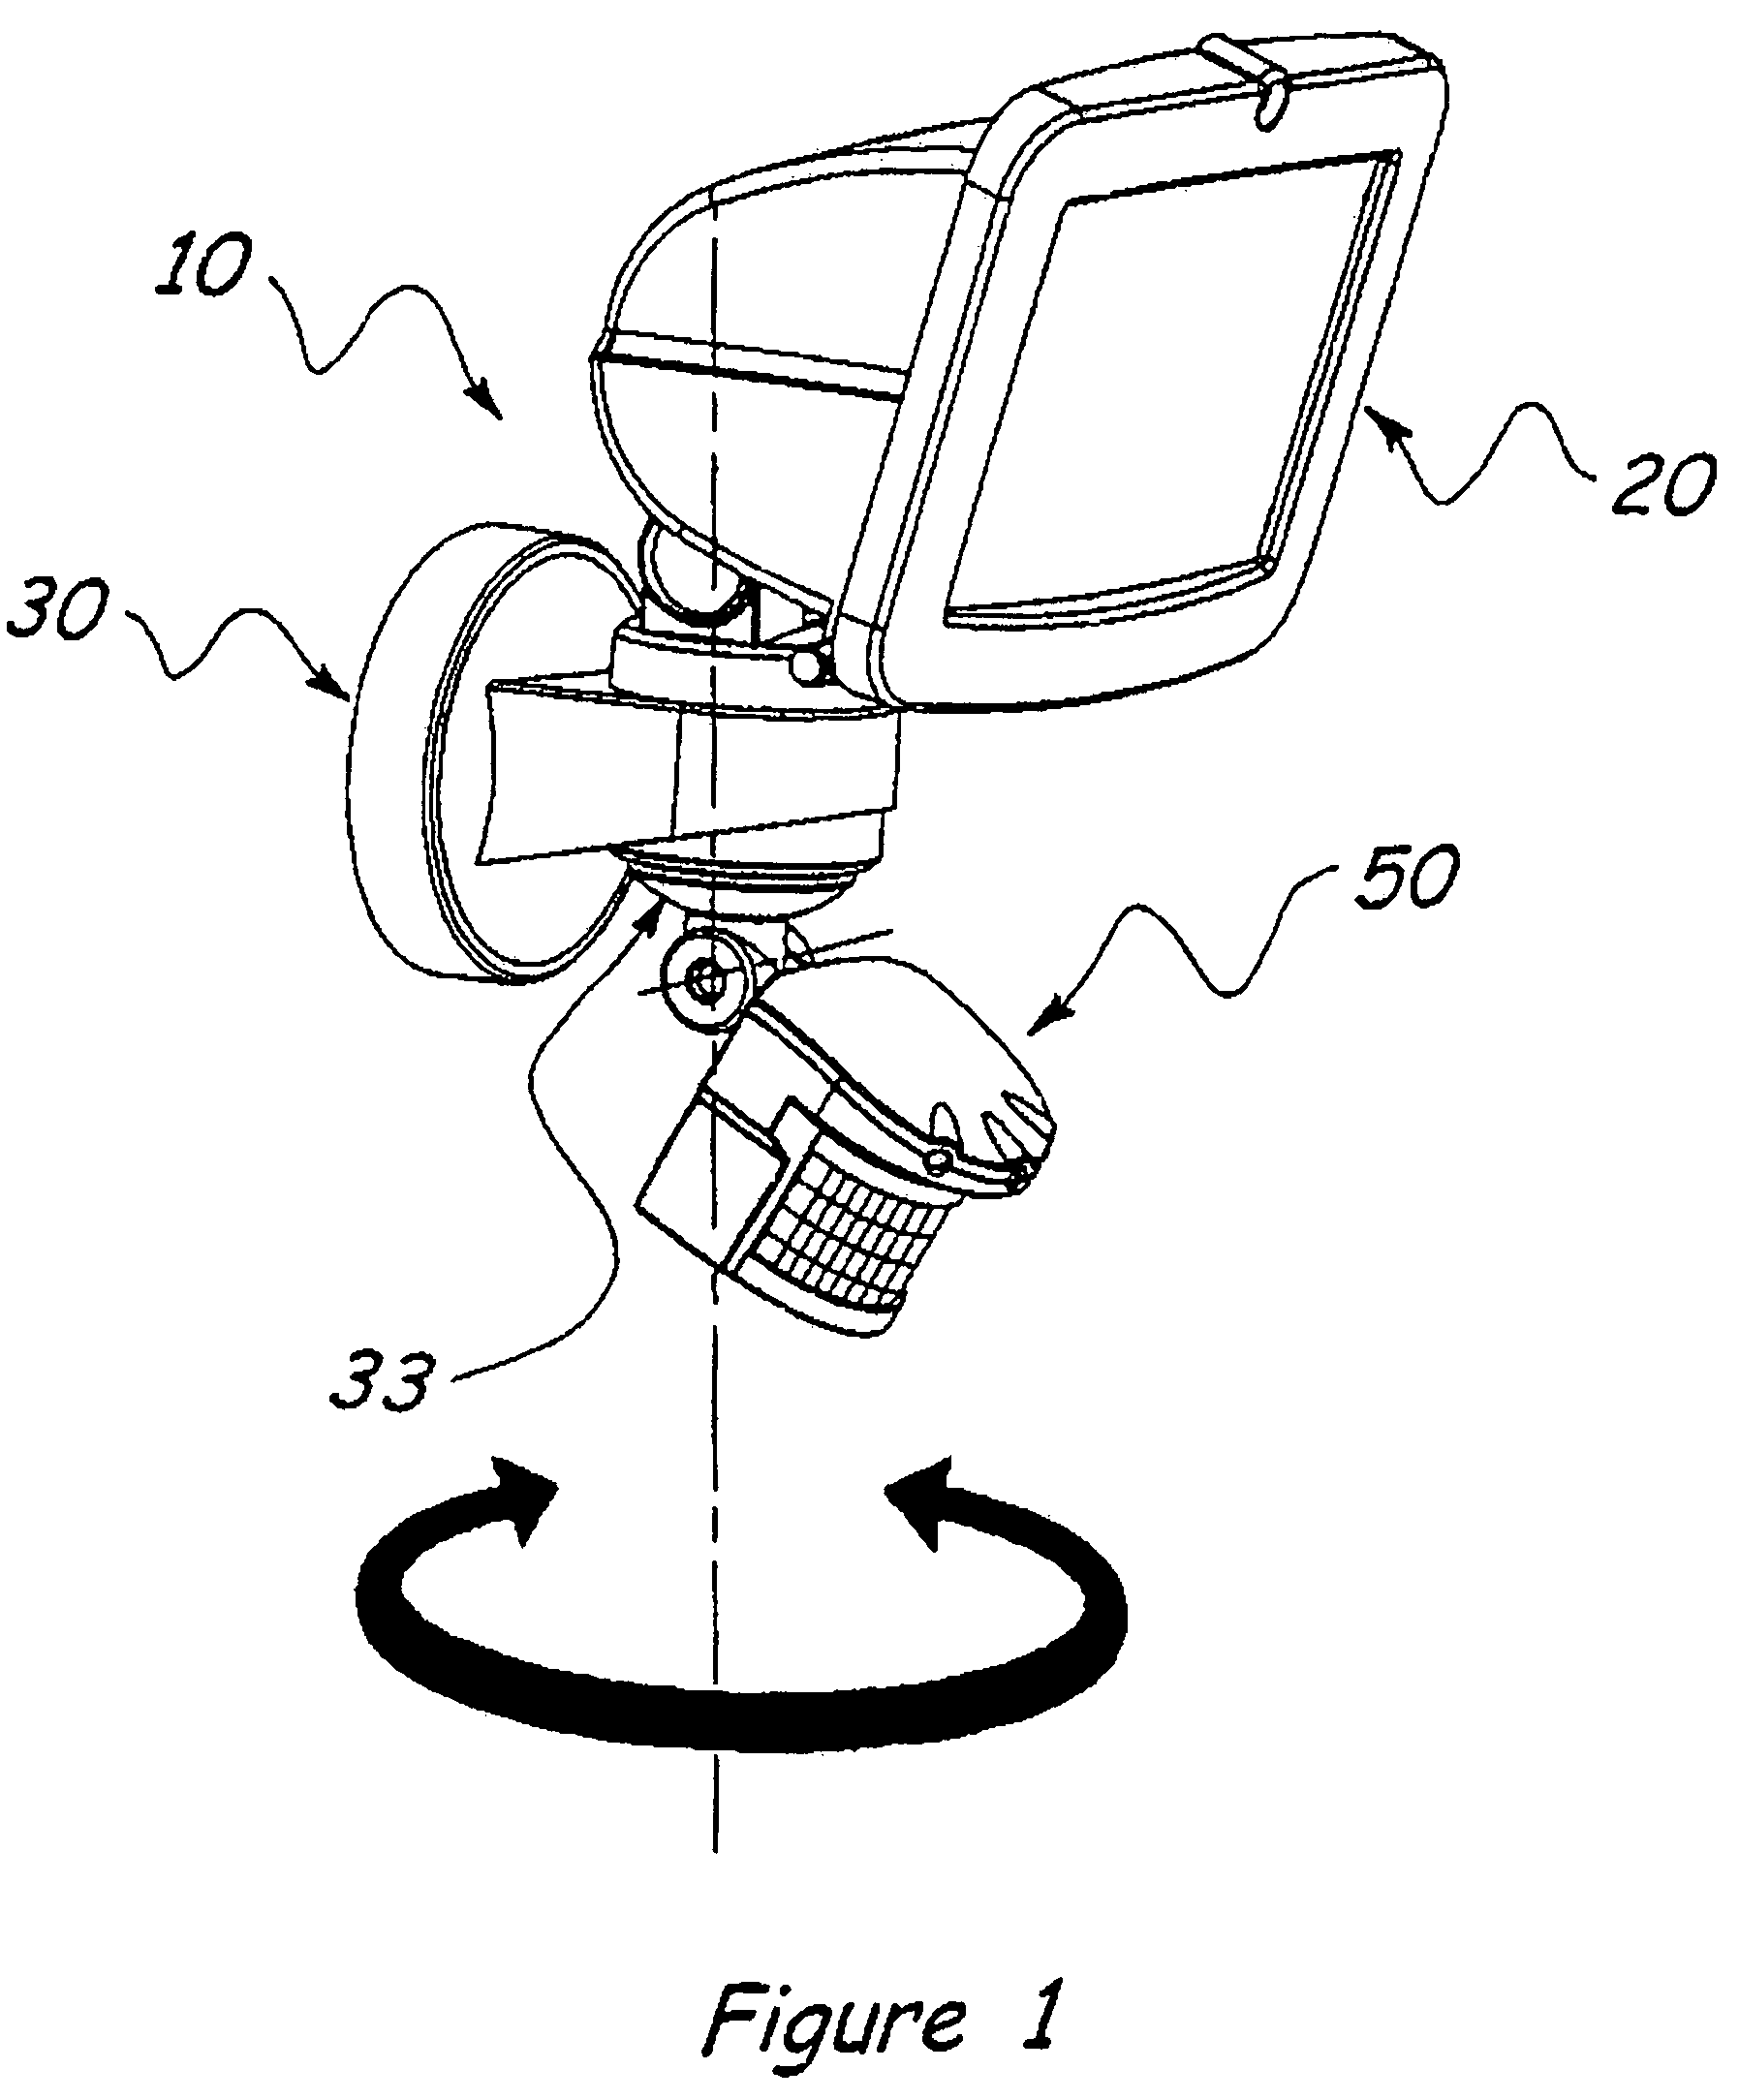 Motion detector device with rotatable focusing views and a method of selecting a specific focusing view